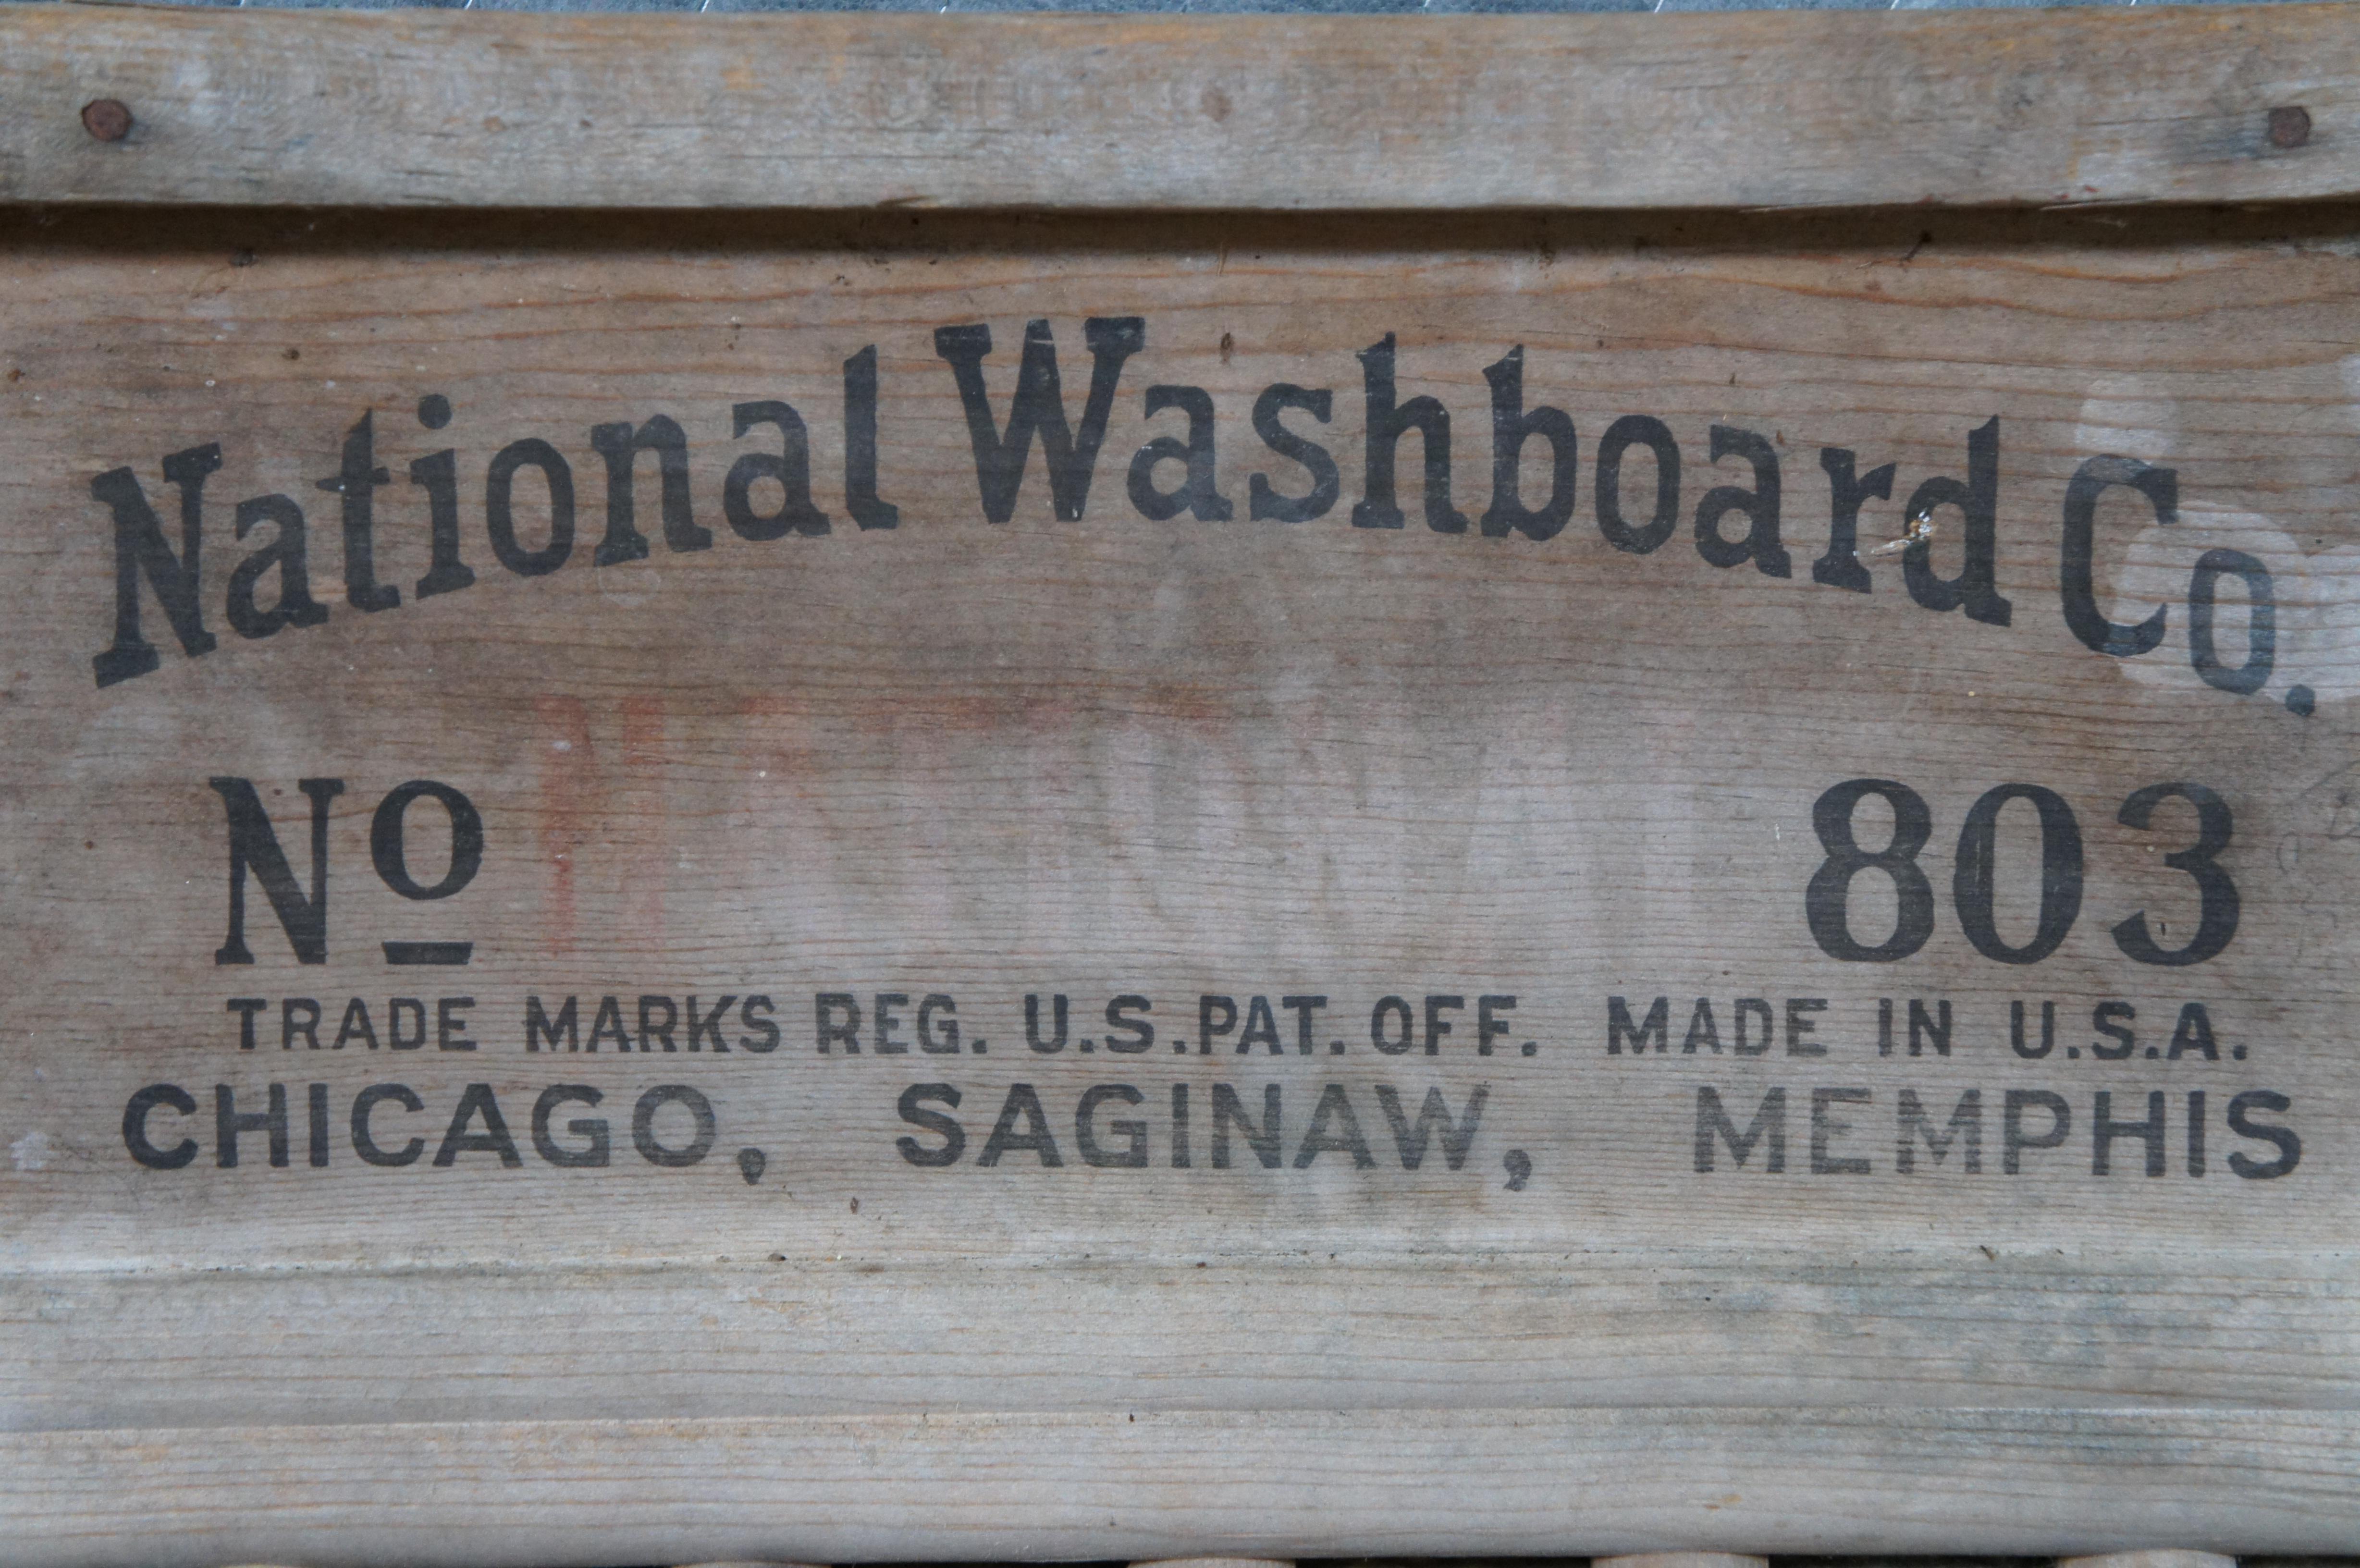 Antique National Washboard Co Brass King Laundry Wash Board No 803 1